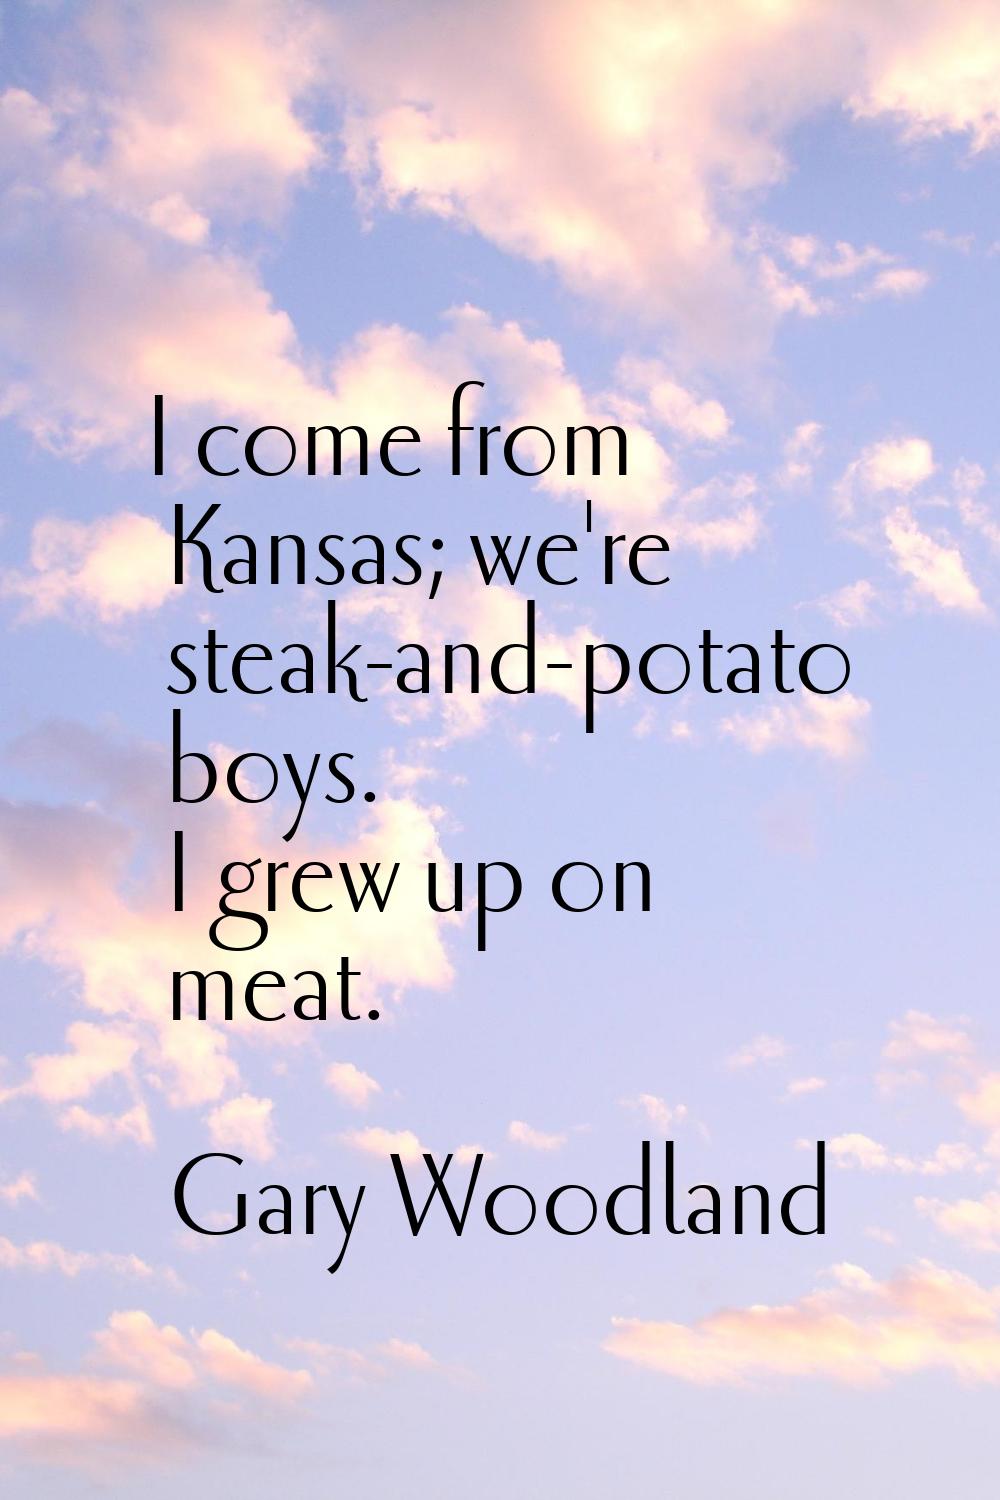 I come from Kansas; we're steak-and-potato boys. I grew up on meat.